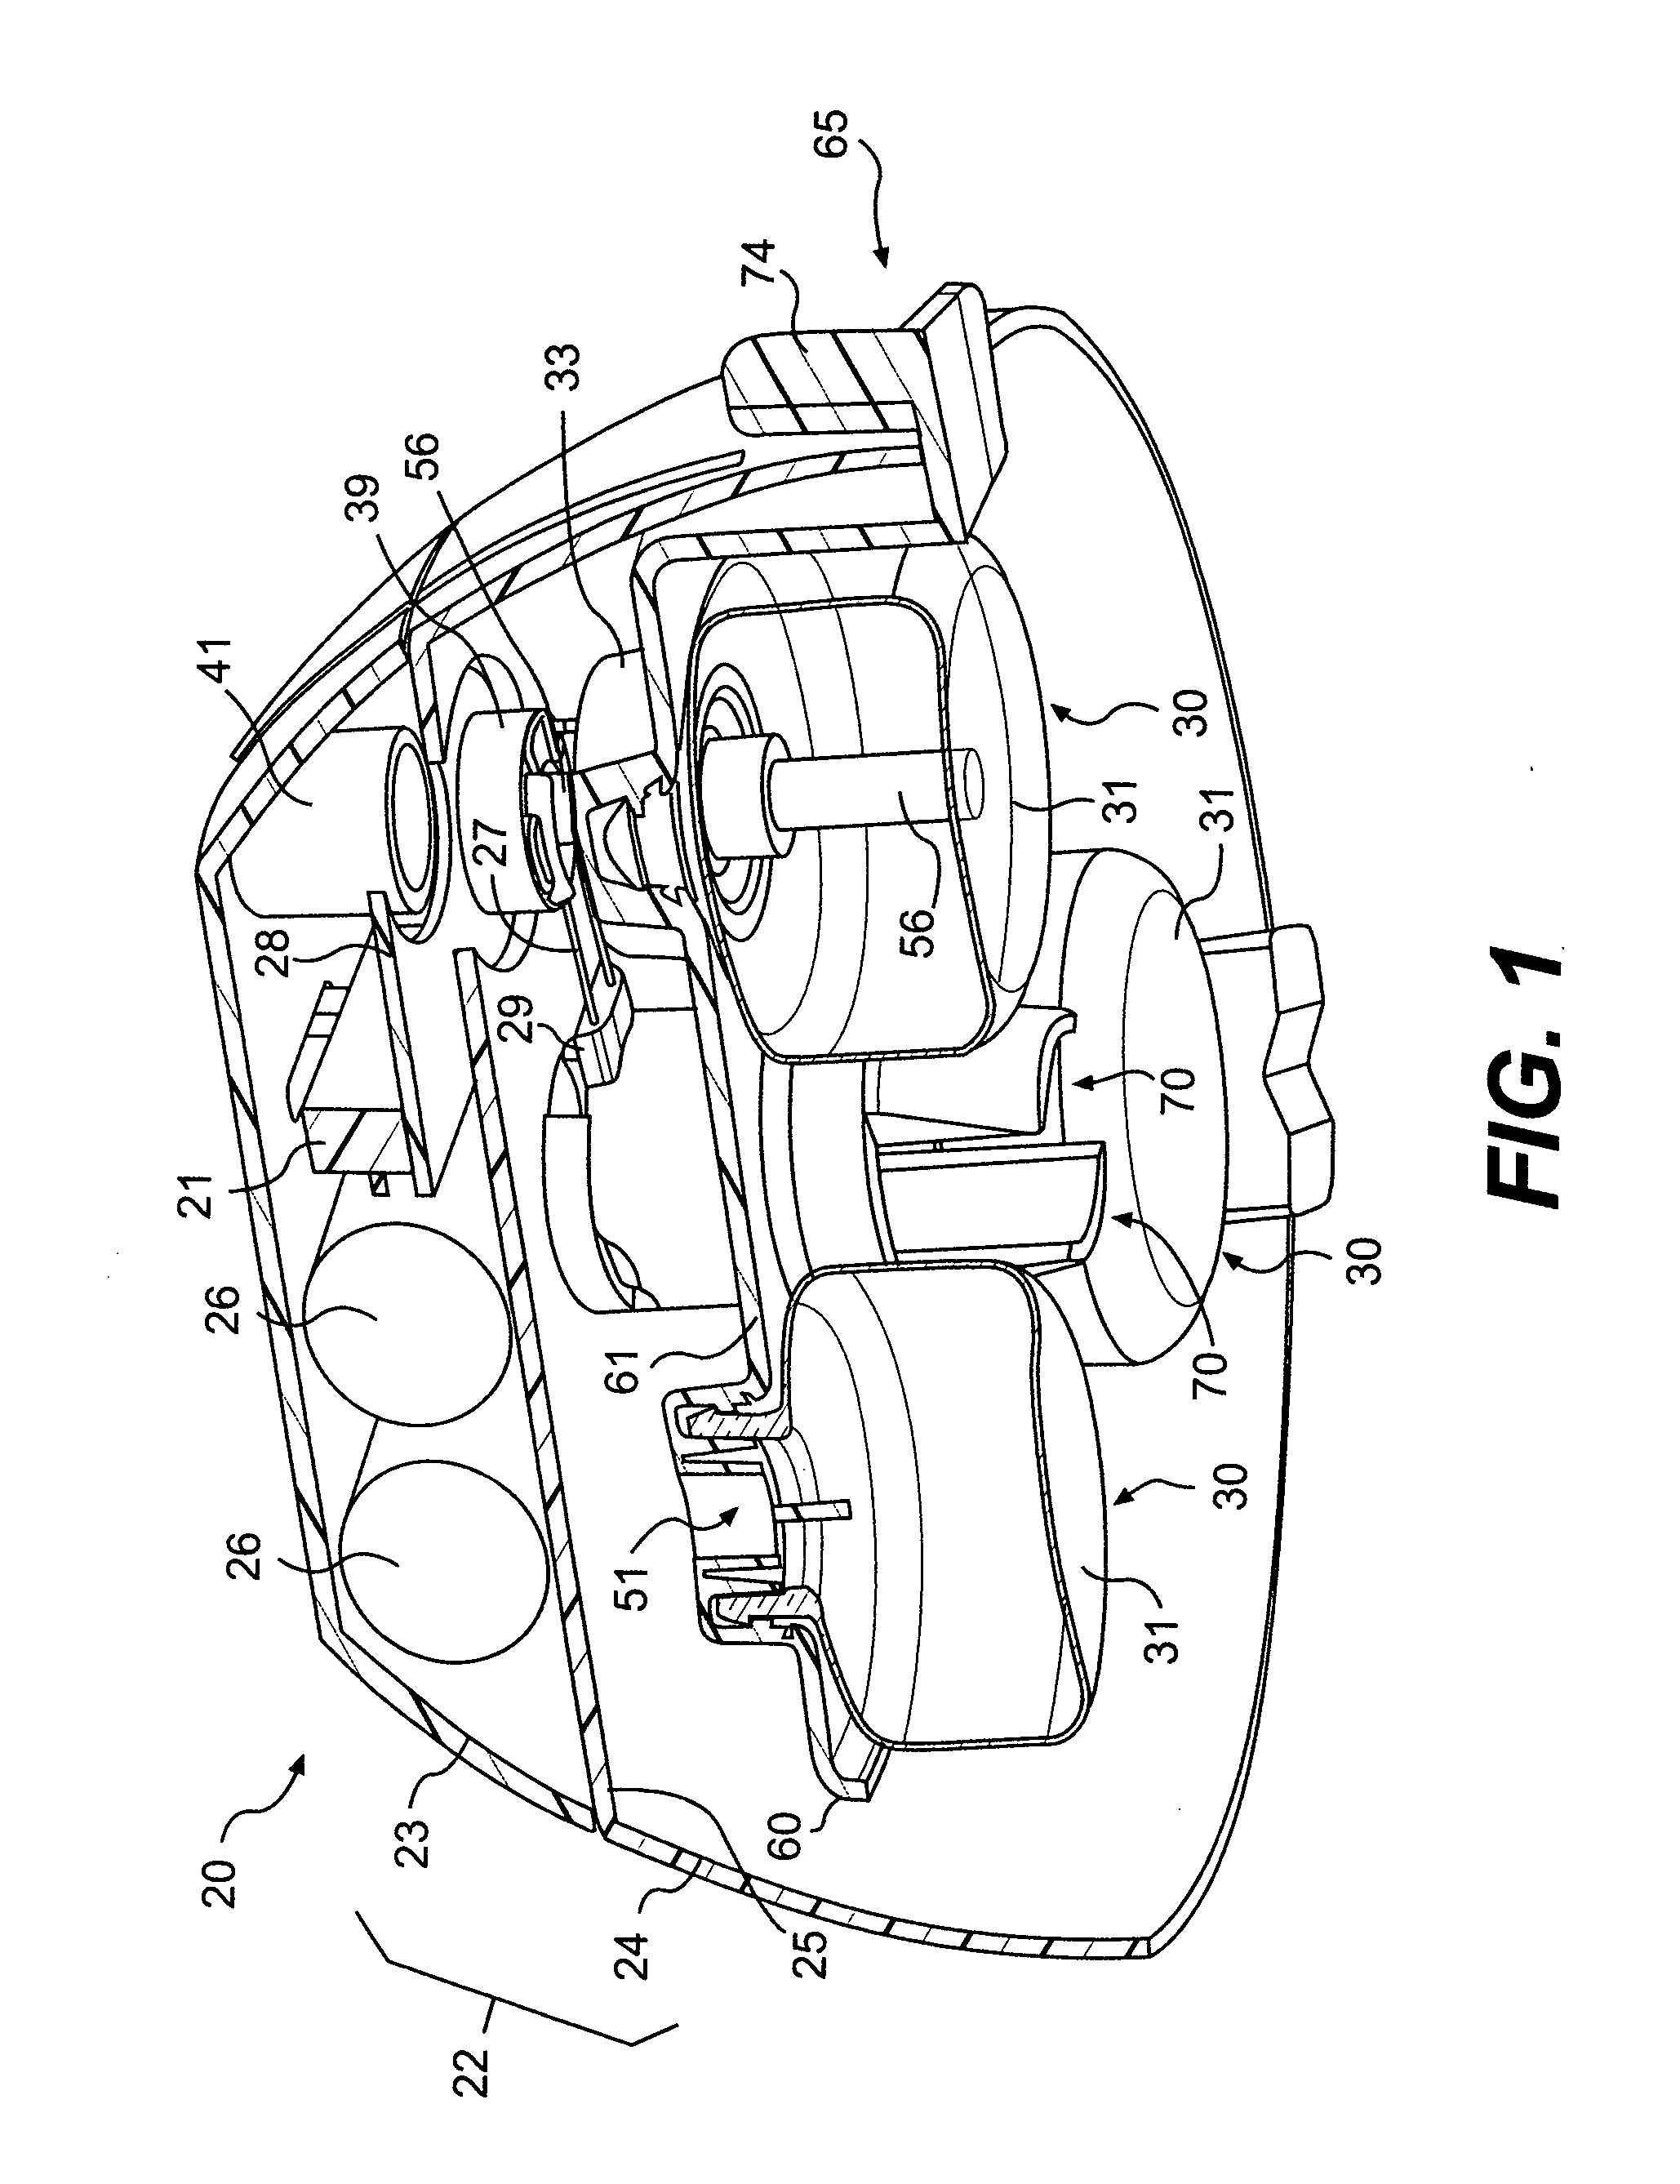 Electromechanical apparatus for dispensing volatile substances with single dispensing mechanism and cartridge for holding multiple receptacles